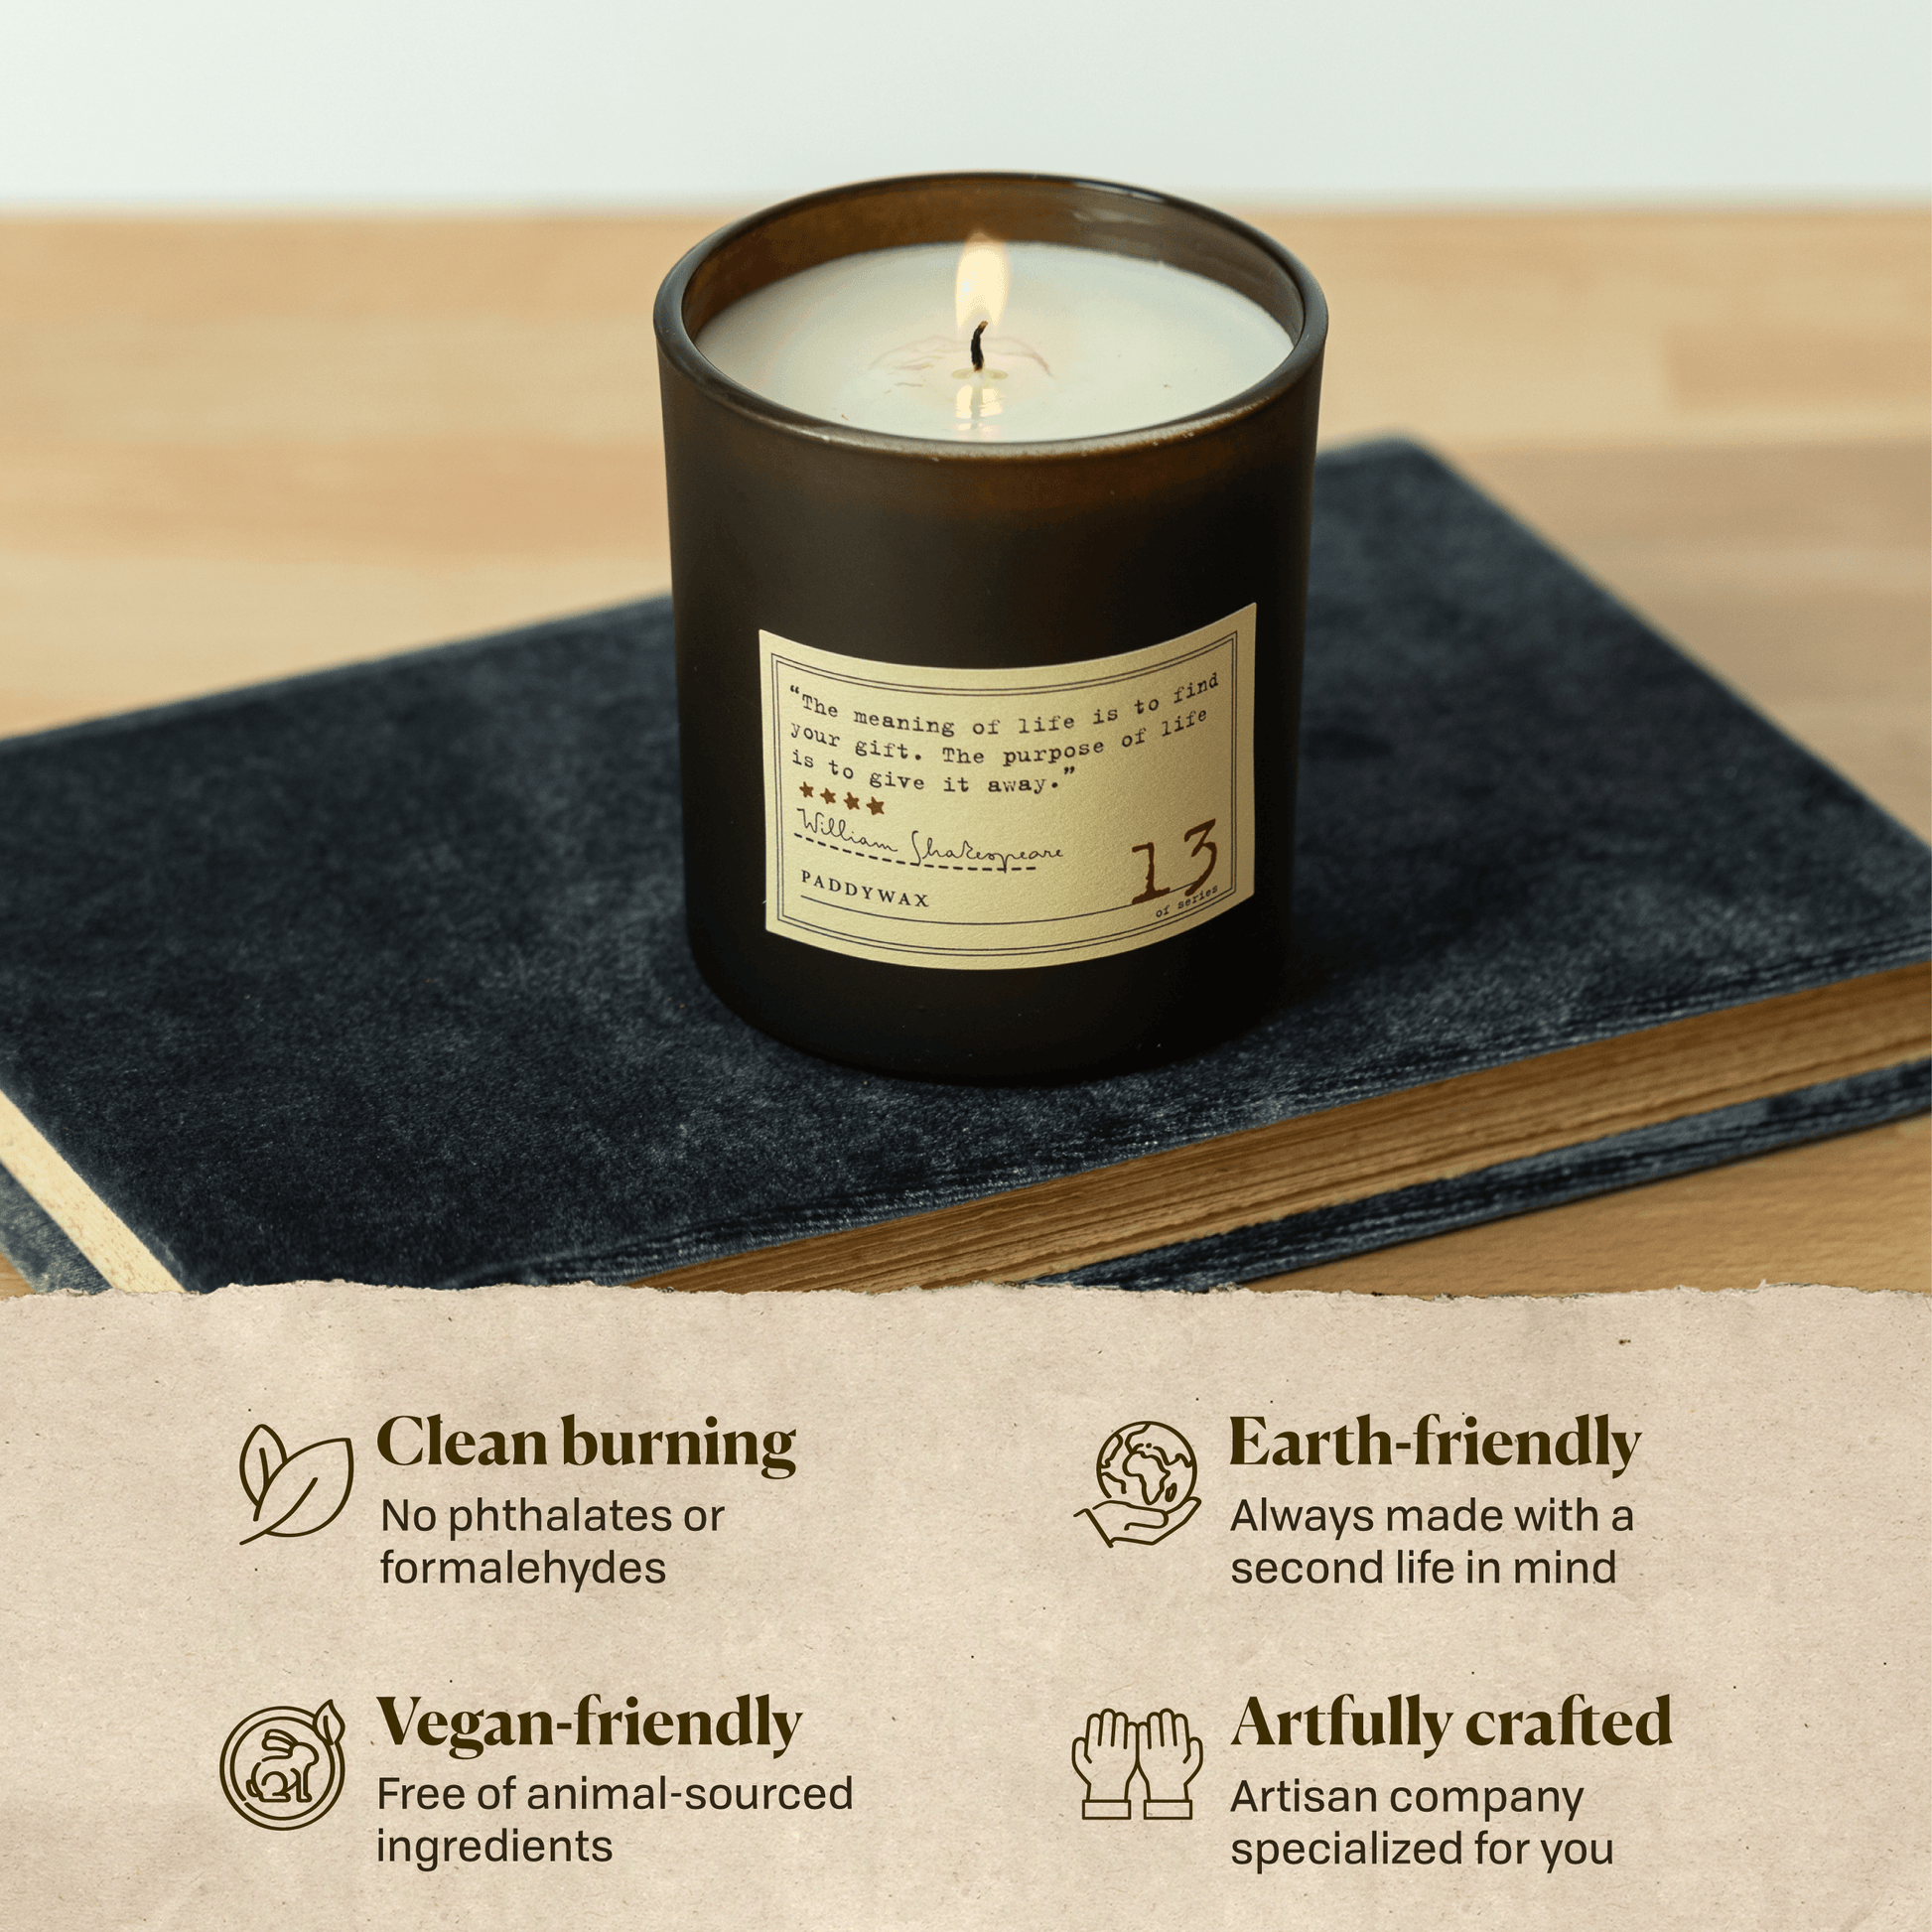 A photo of the William Shakespeare candle sitting on a book. Clean burning: no phthalates or formaldehydes. Earth-friendly: Always made with a second life in mind. Vegan-friendly: Free of animal sourced ingredients. Artfully crafted: Artisan company specialized for you.